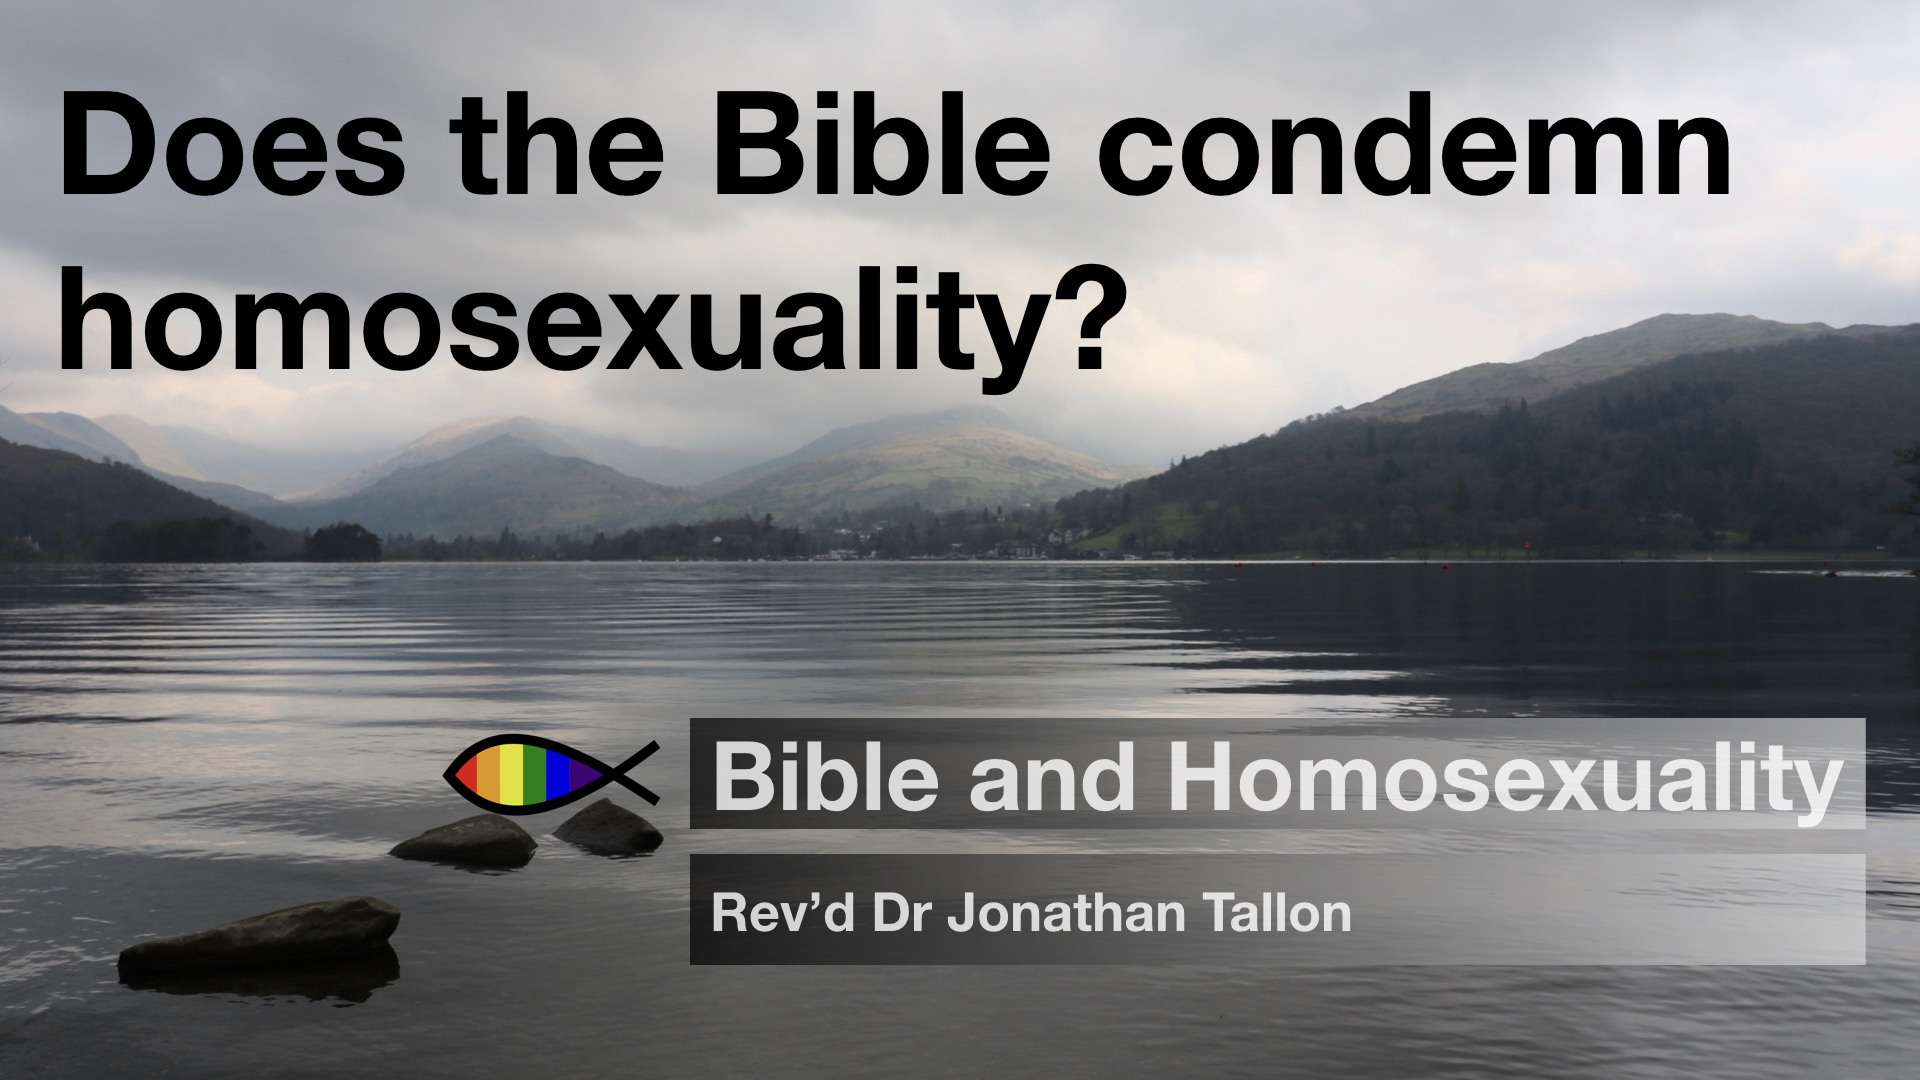 Does the Bible condemn homosexuality?